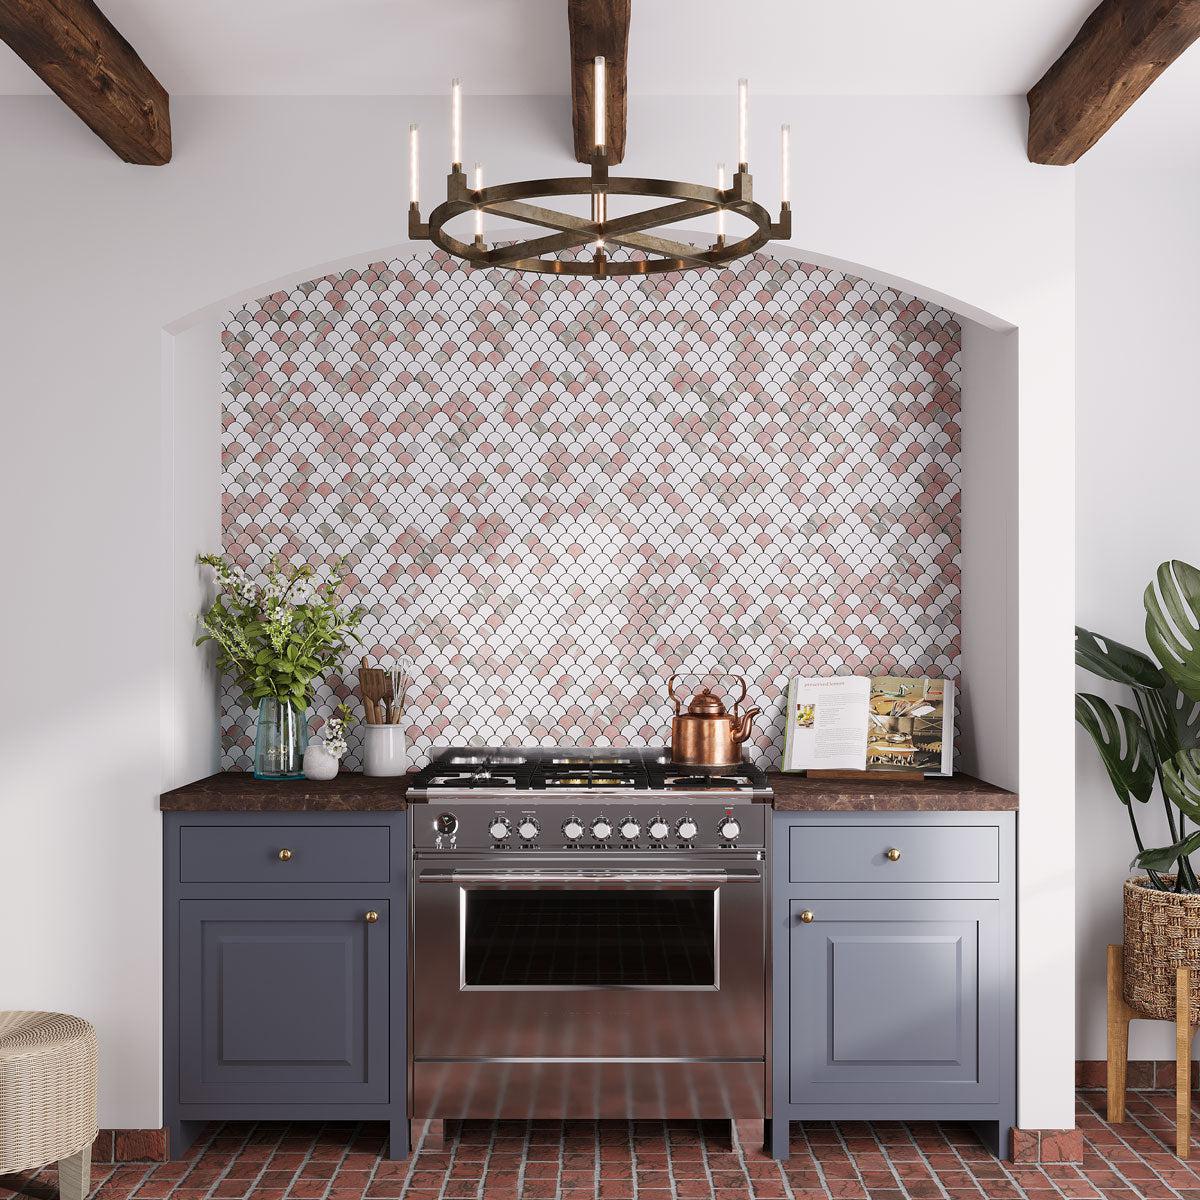 Pink and white marble scale wall tile behind the kitchen stove